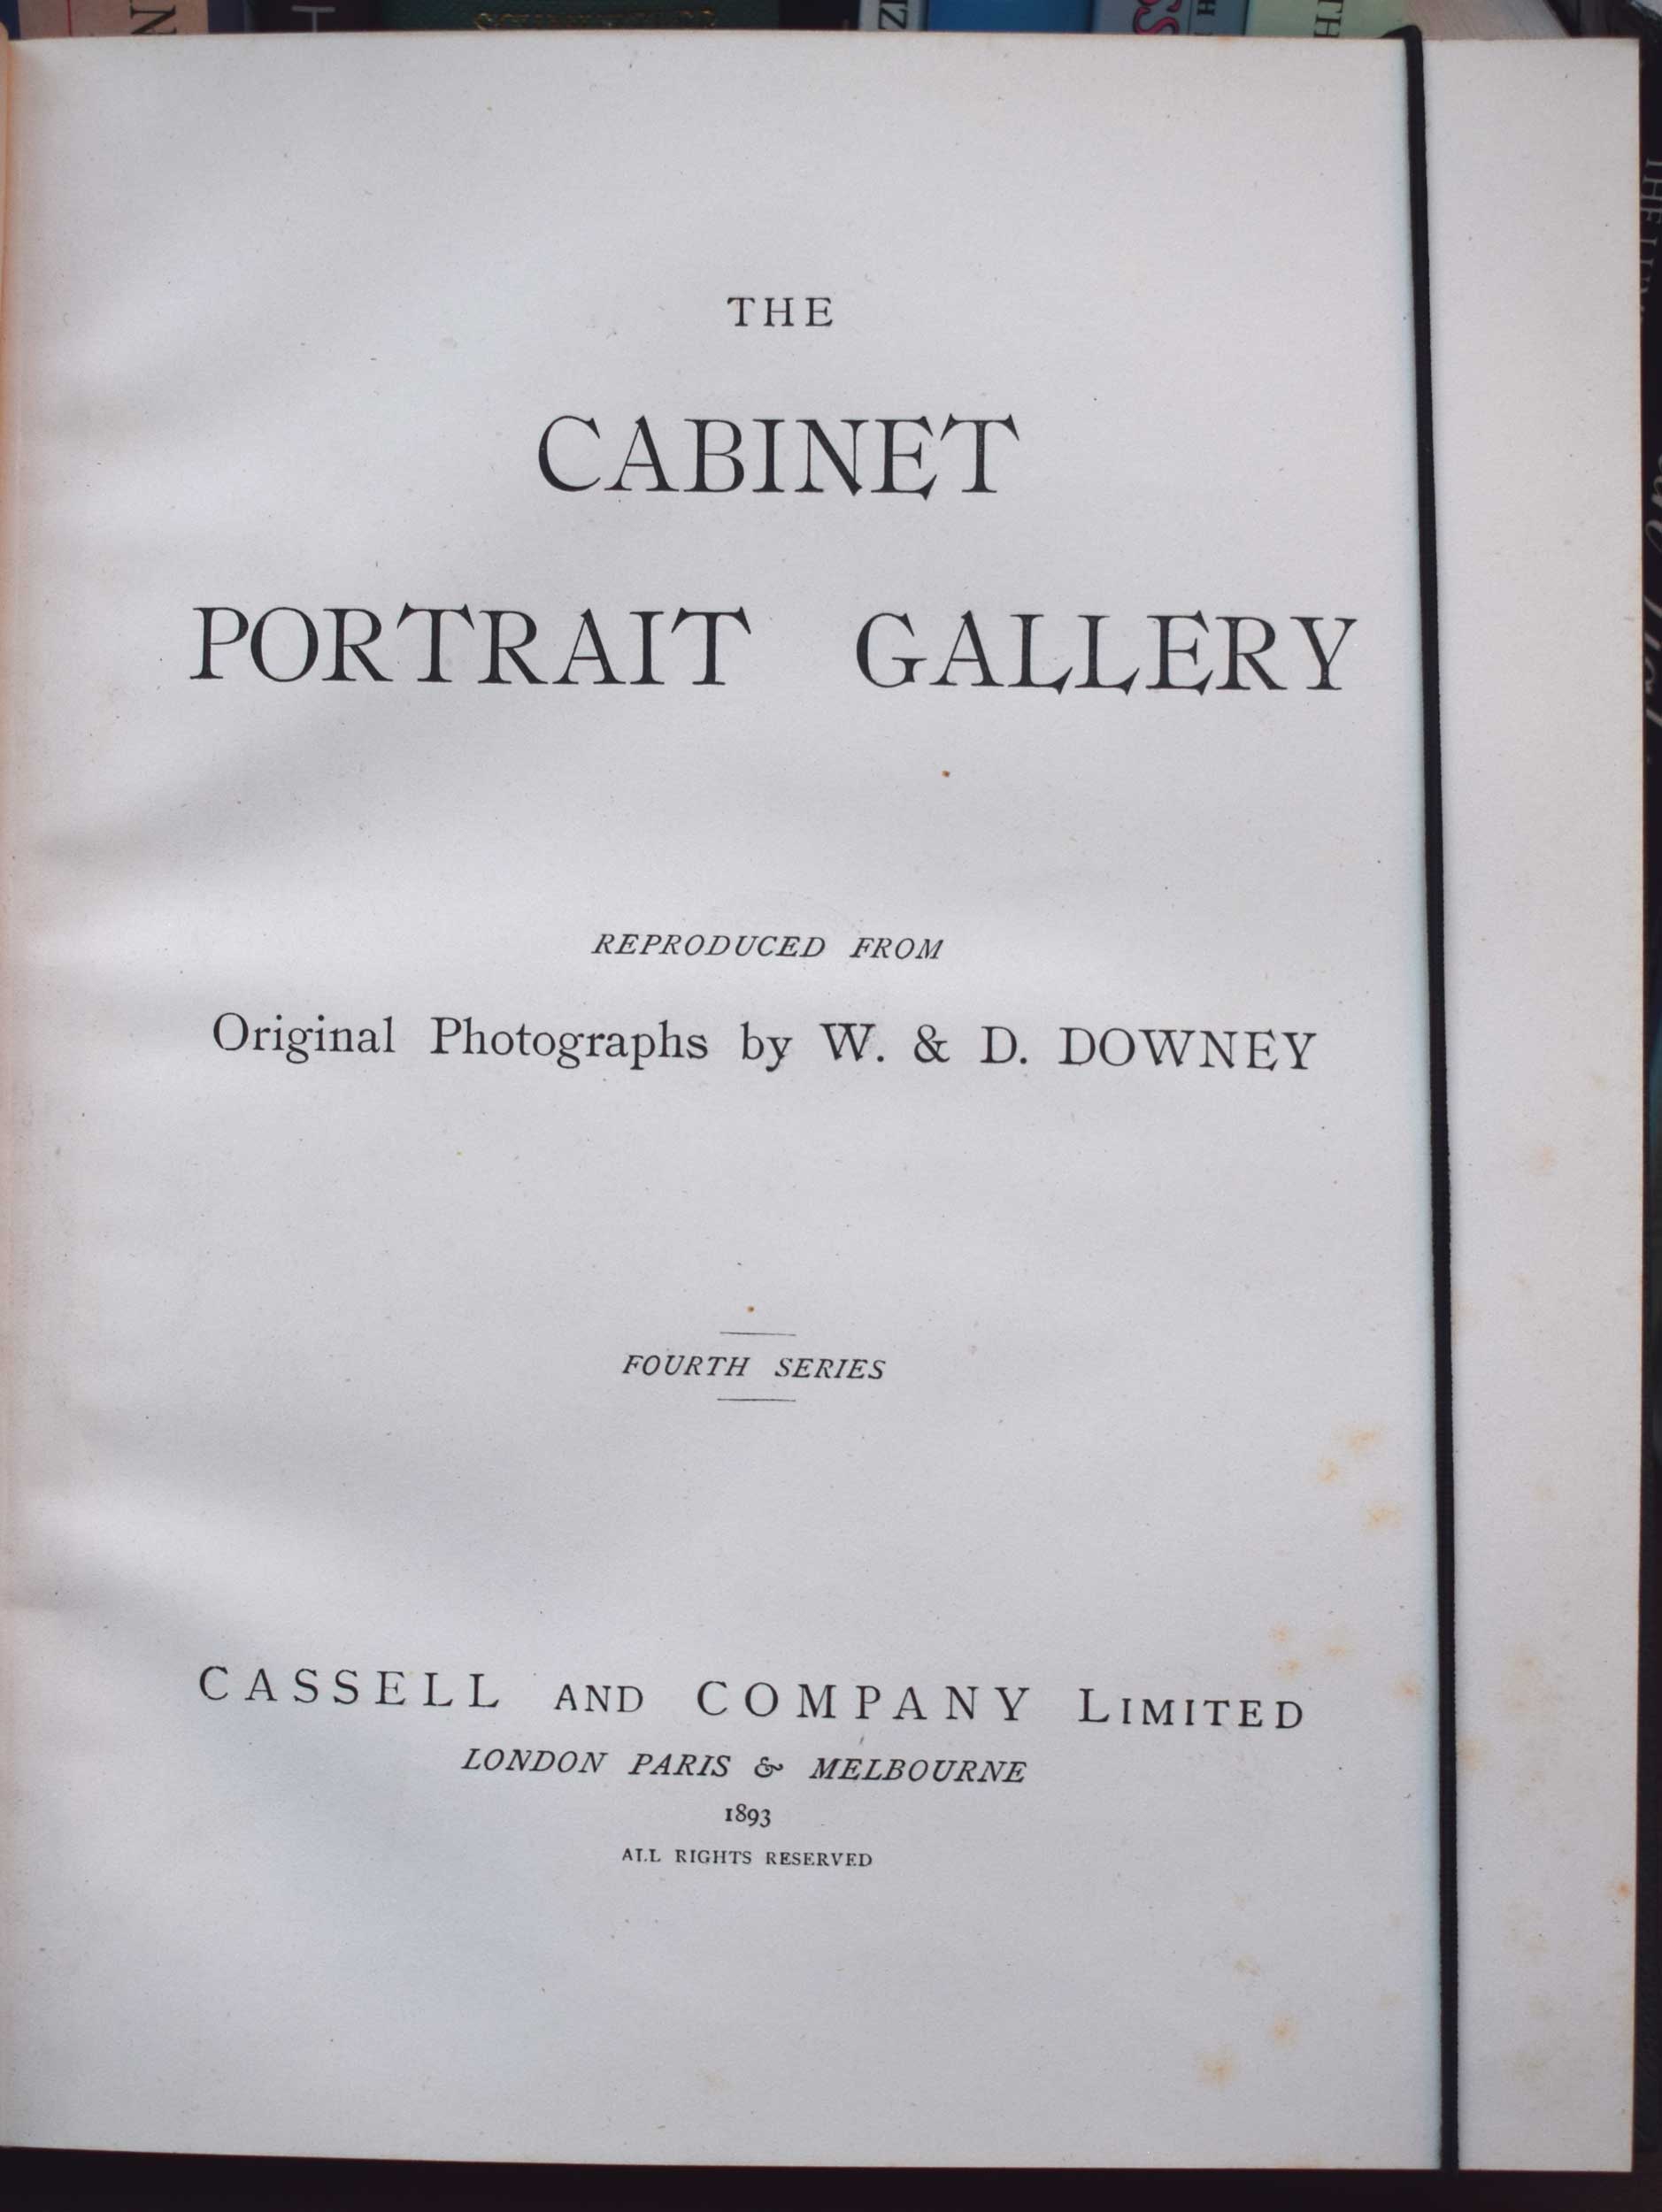 The Cabinet Portrait Gallery Reproduced from Original Photographs by W & D Downey. Fourth Series